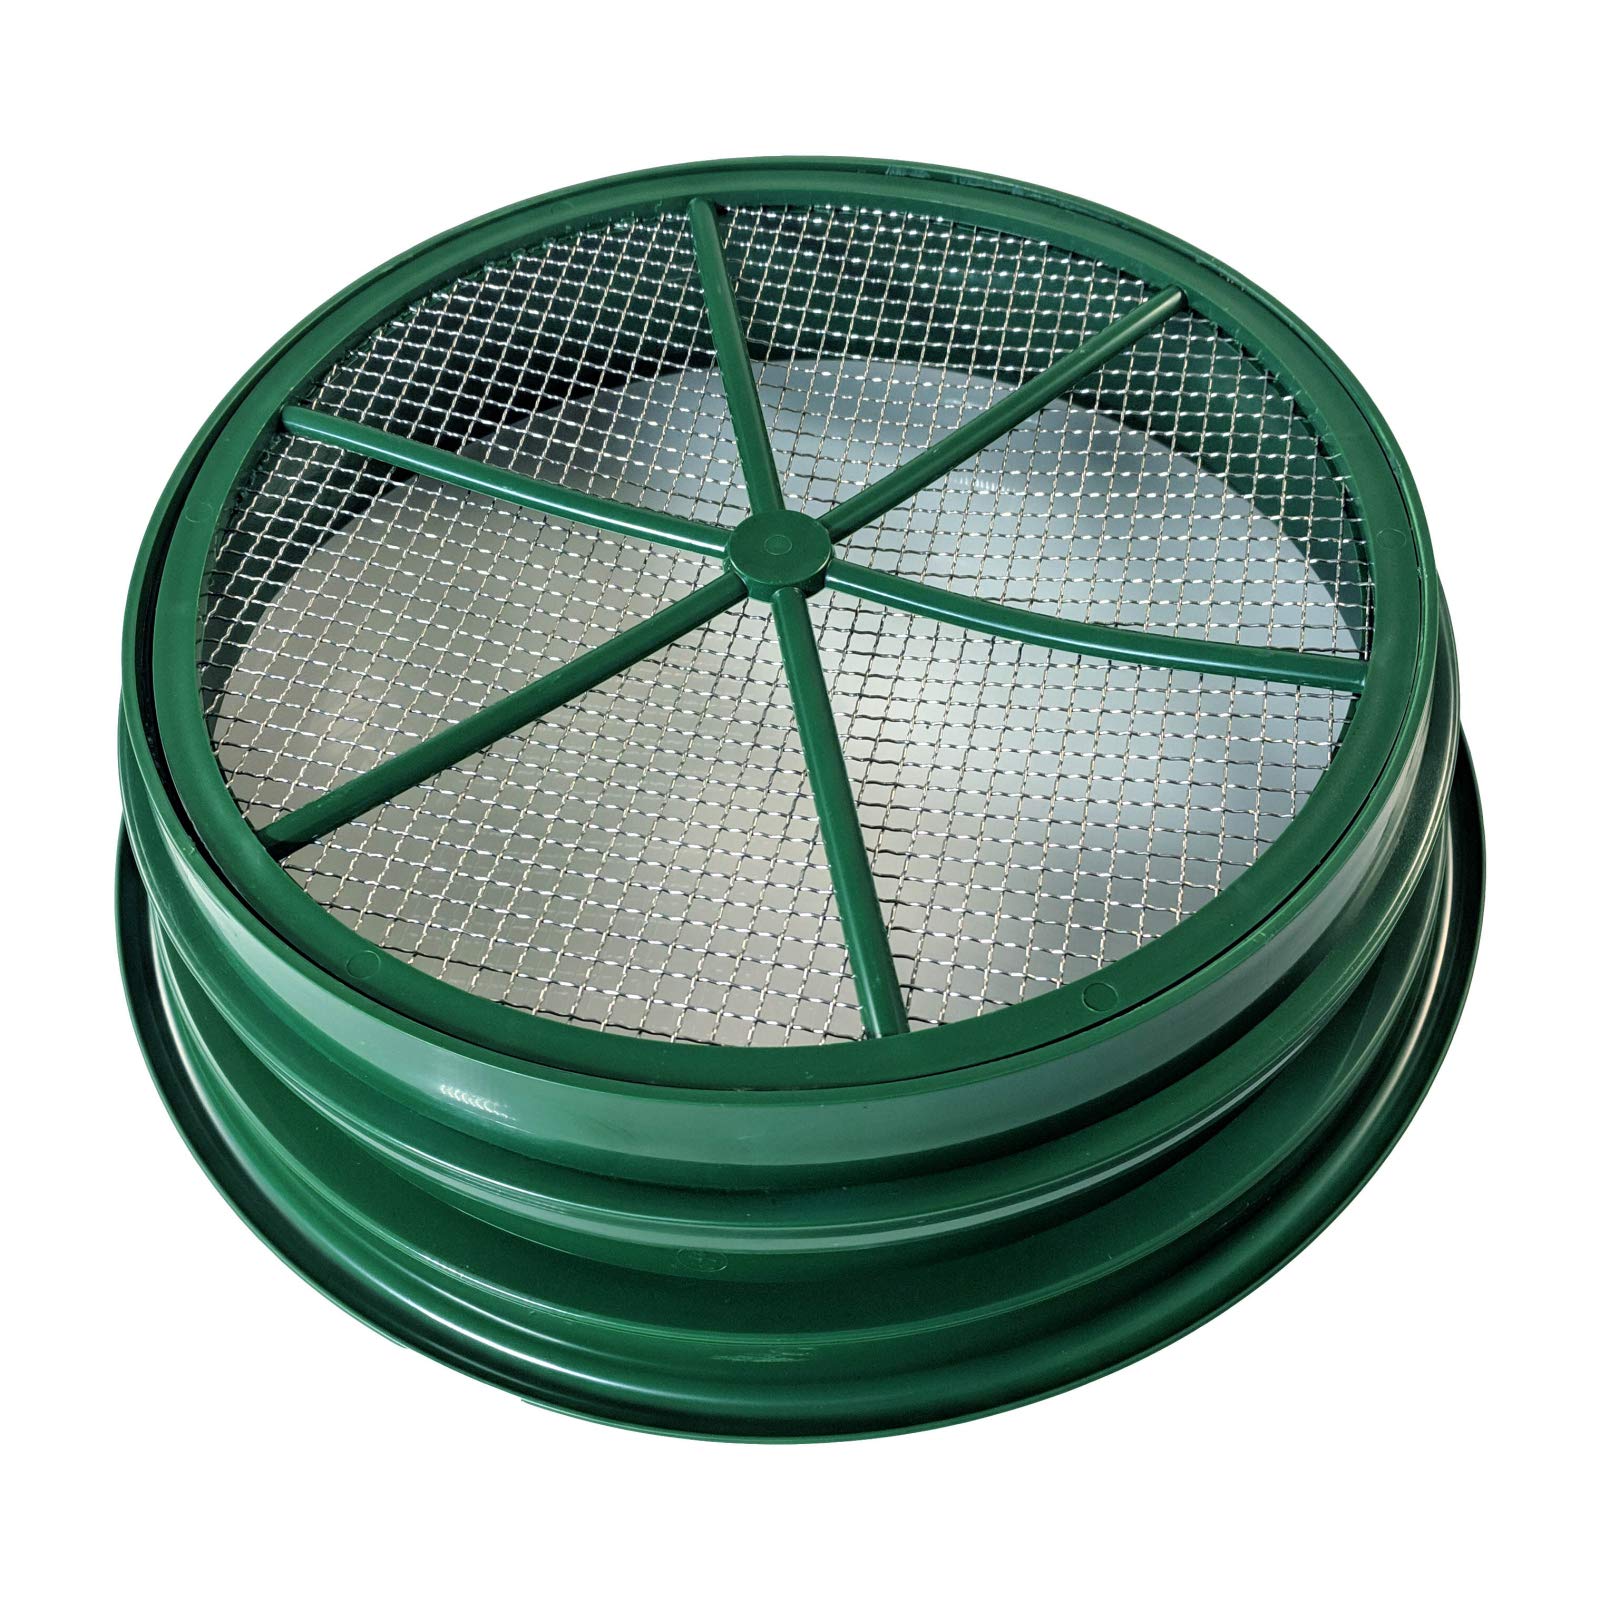 ASR Outdoor Gold Panning 1/4 Classifier Screen Sifting Pan Prospecting Mesh Sieve